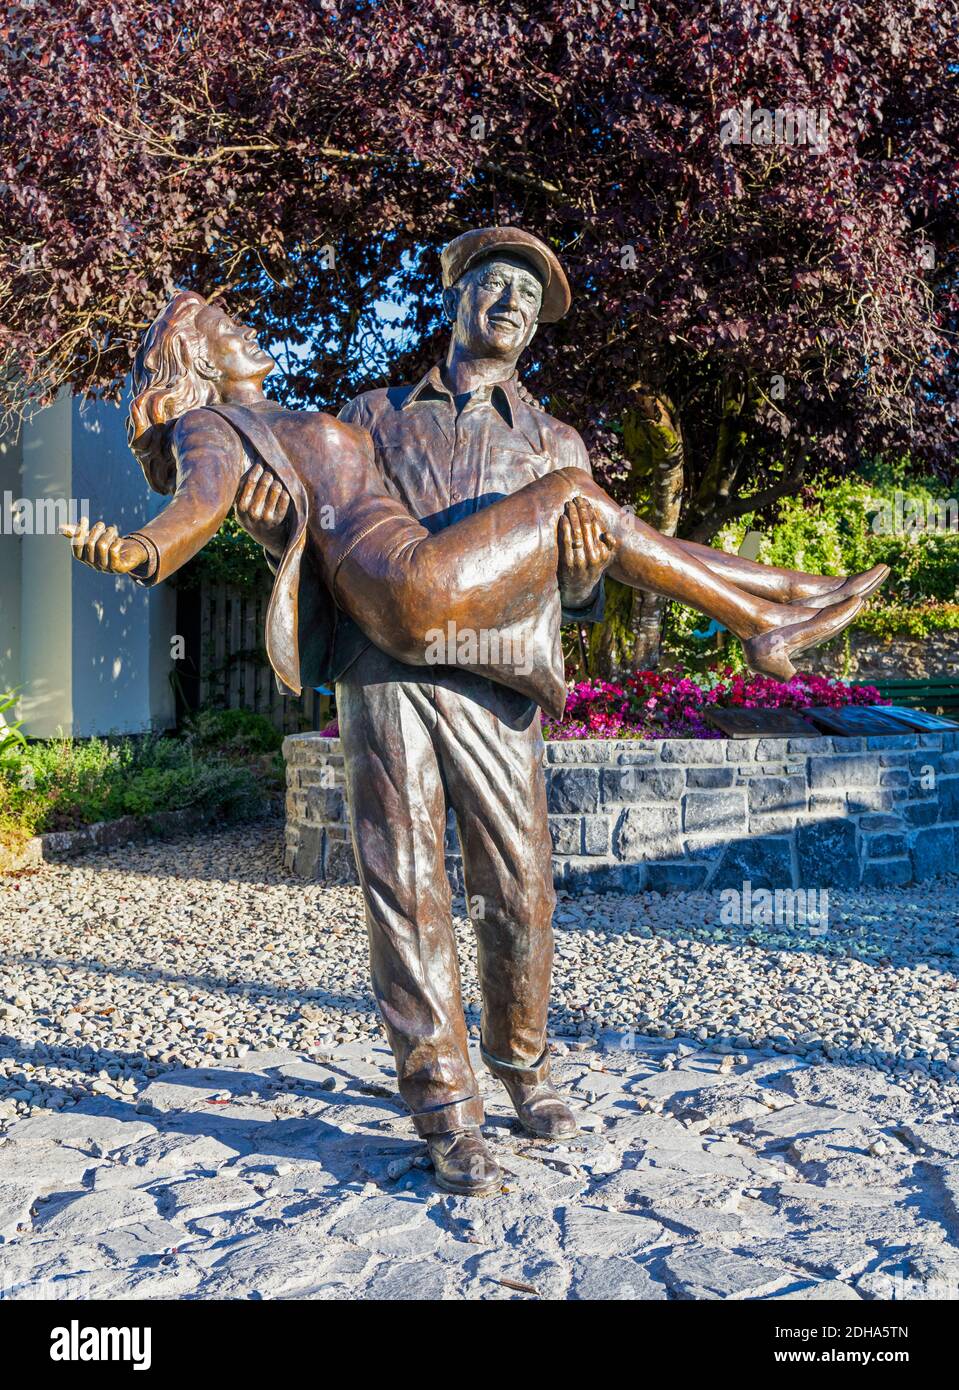 The Quiet Man statue, Cong, County Mayo, Connemara, Republic of Ireland. Eire. The statue is based on the theatrical release poster for the film and s Stock Photo